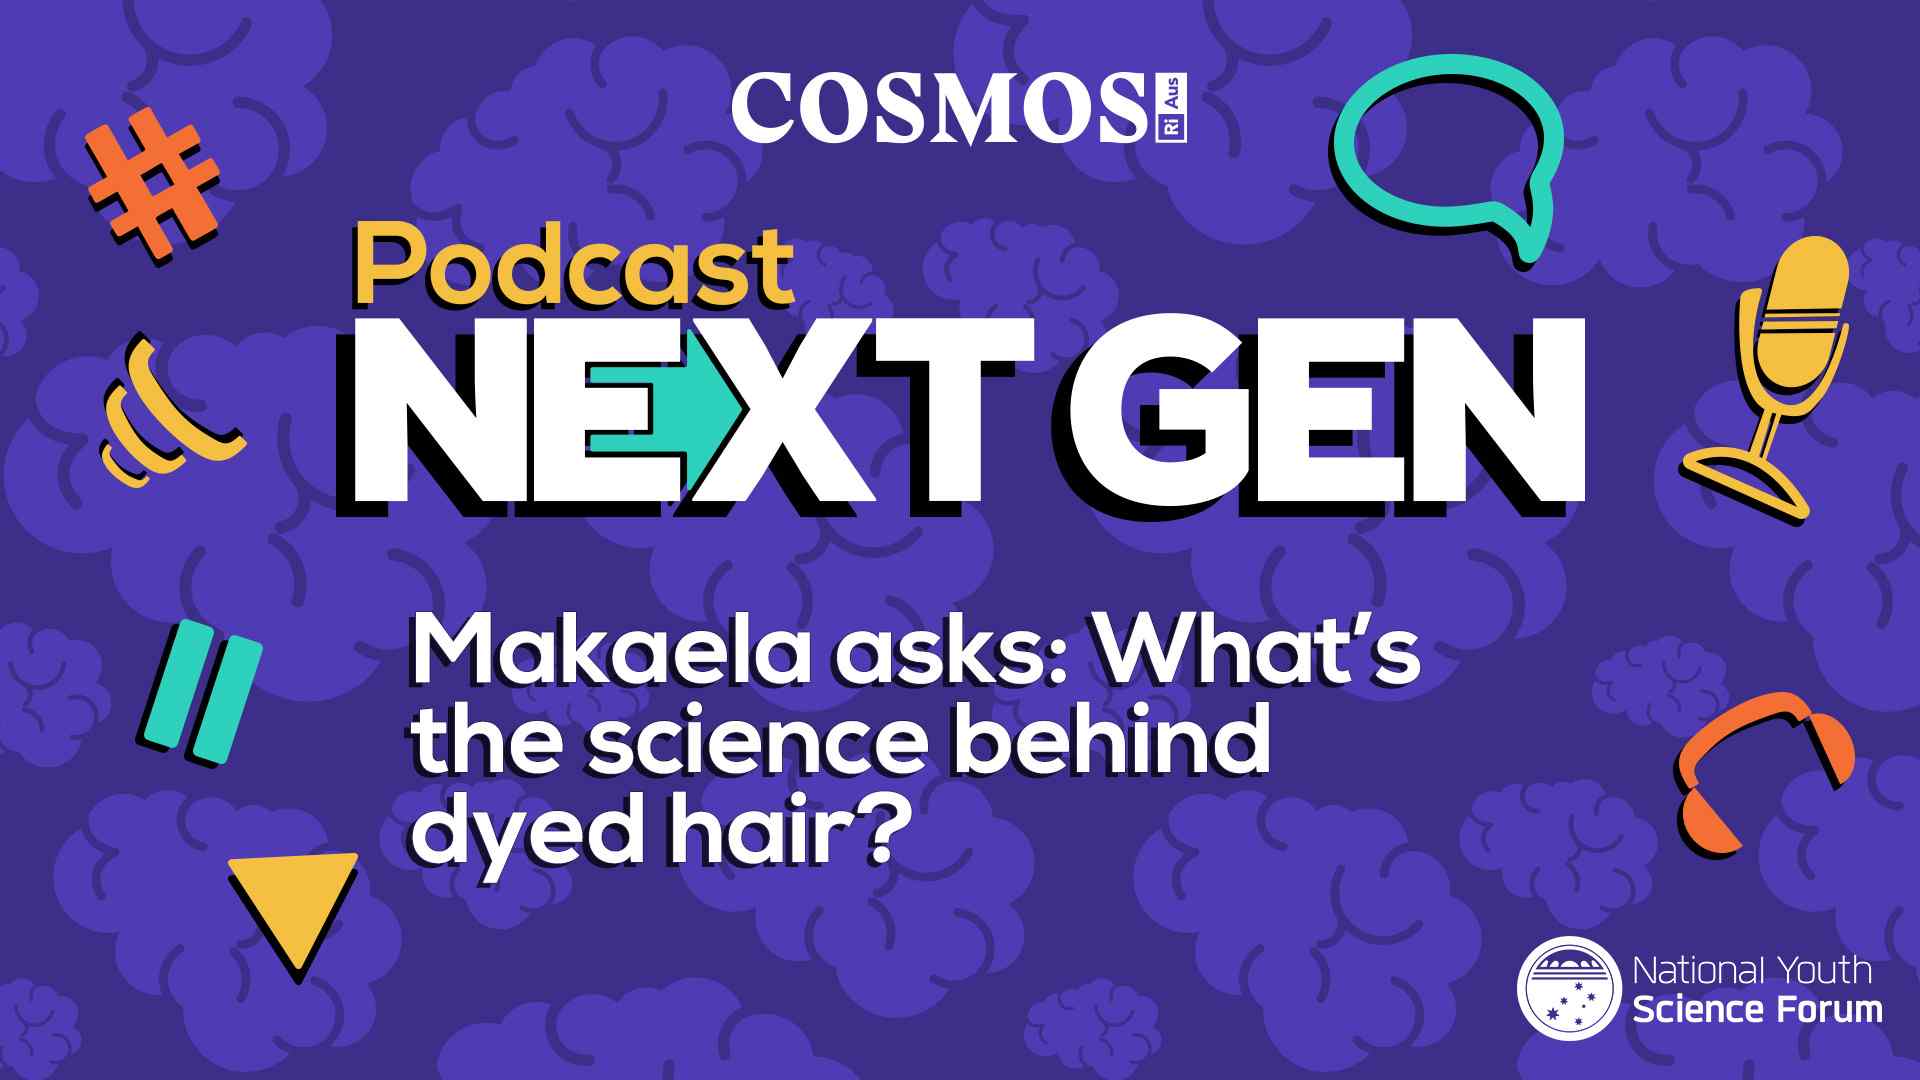 PODCAST NEXT GEN: What’s the science behind dyed hair?